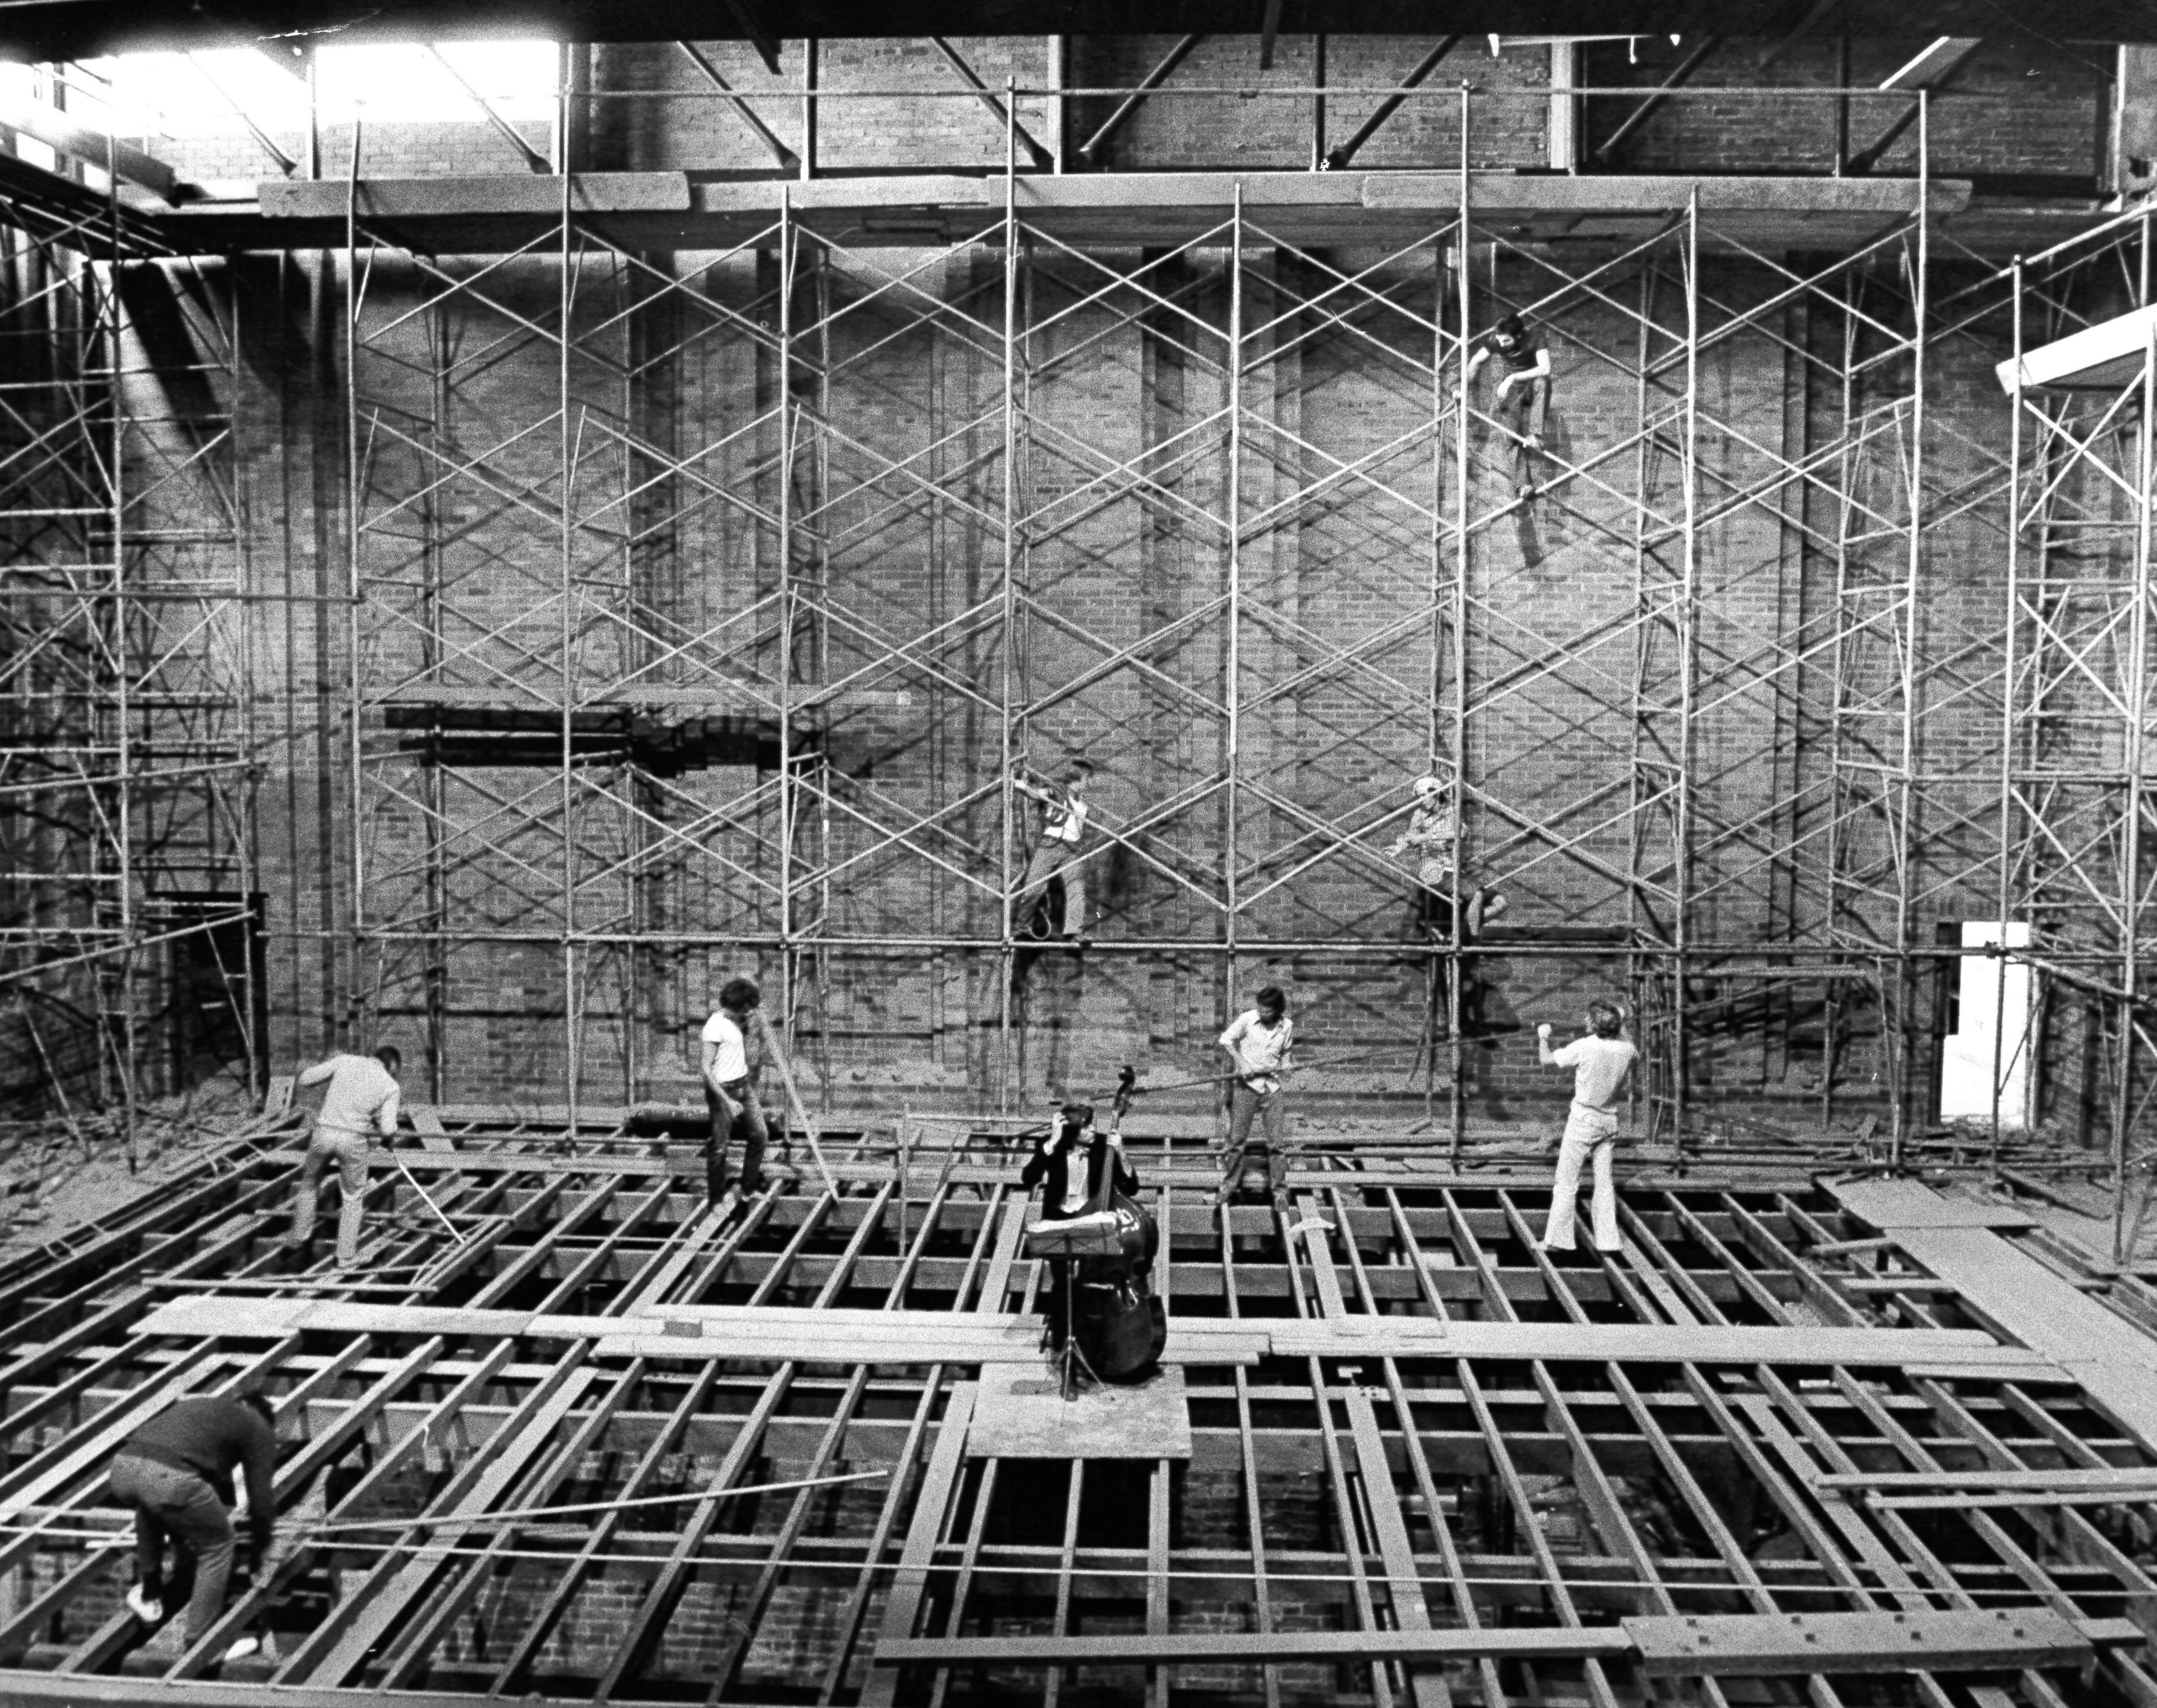 Black and white archival image of the Everest Theatre construction with a cellist surrounded by 7 construction workers.